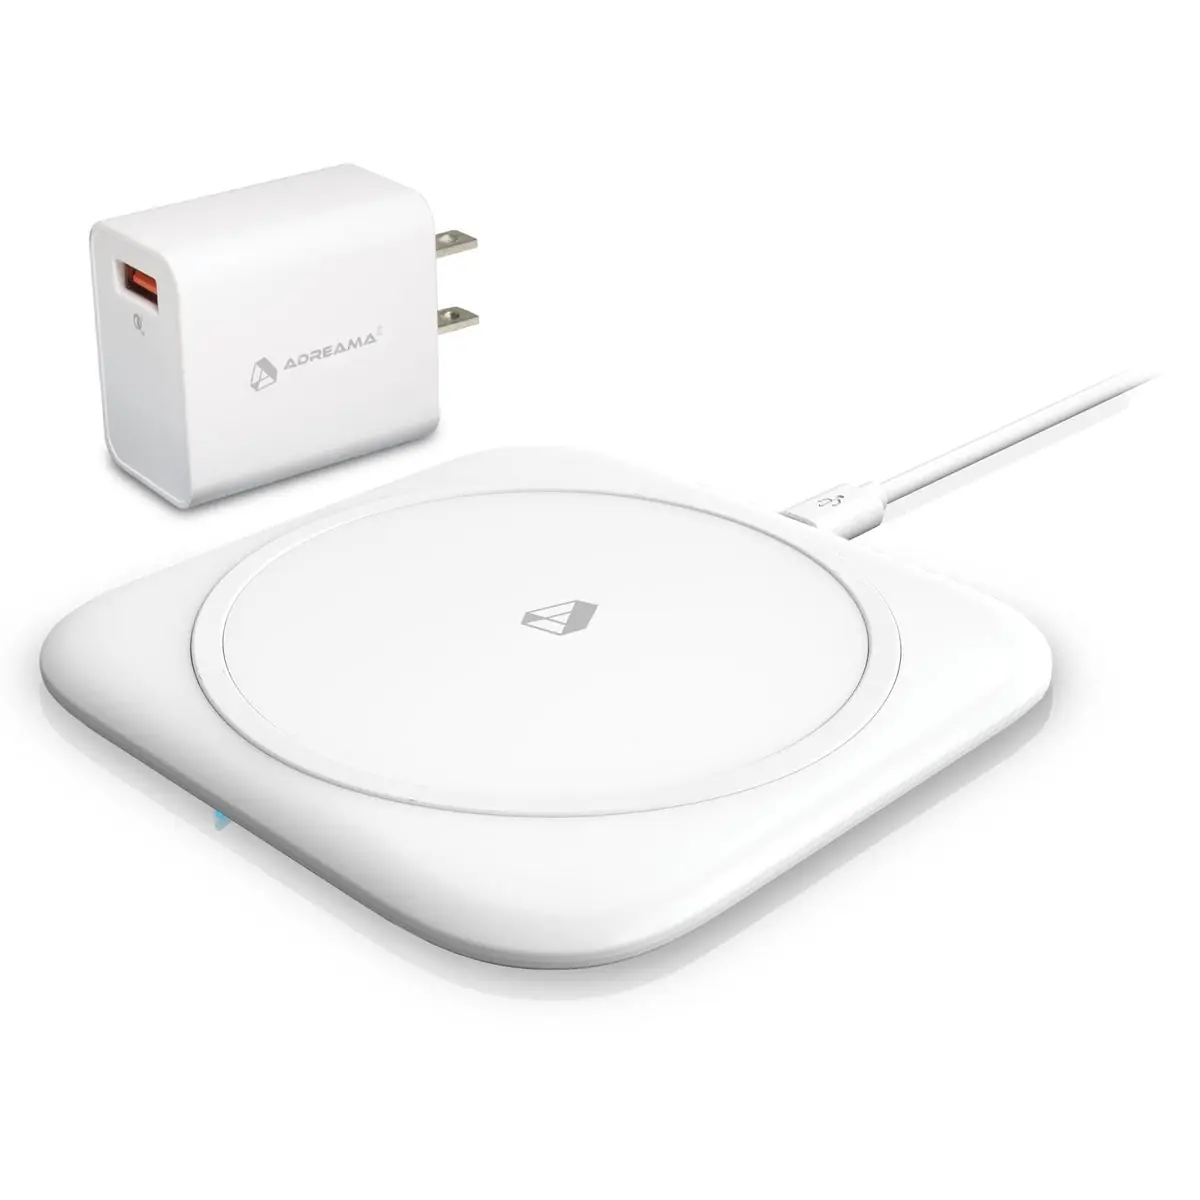 Adreama Wireless Charging Pad comes with an 18W Wall Charger included for an unbeatable value compared to other charging solutions.